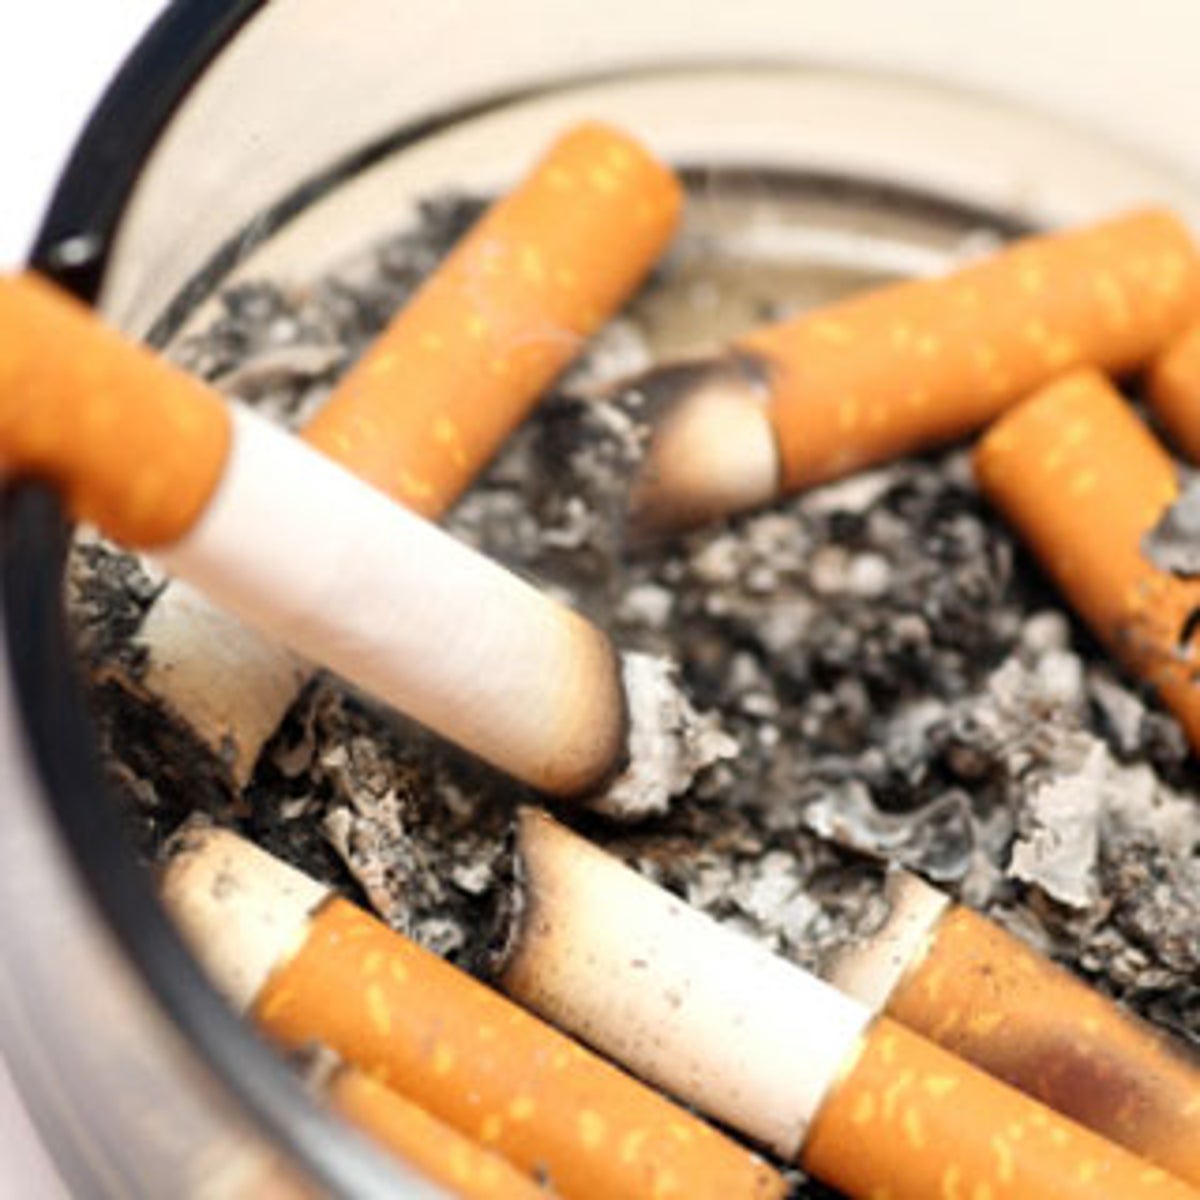 Cigarettes release dangerous toxins even after they're put out: study